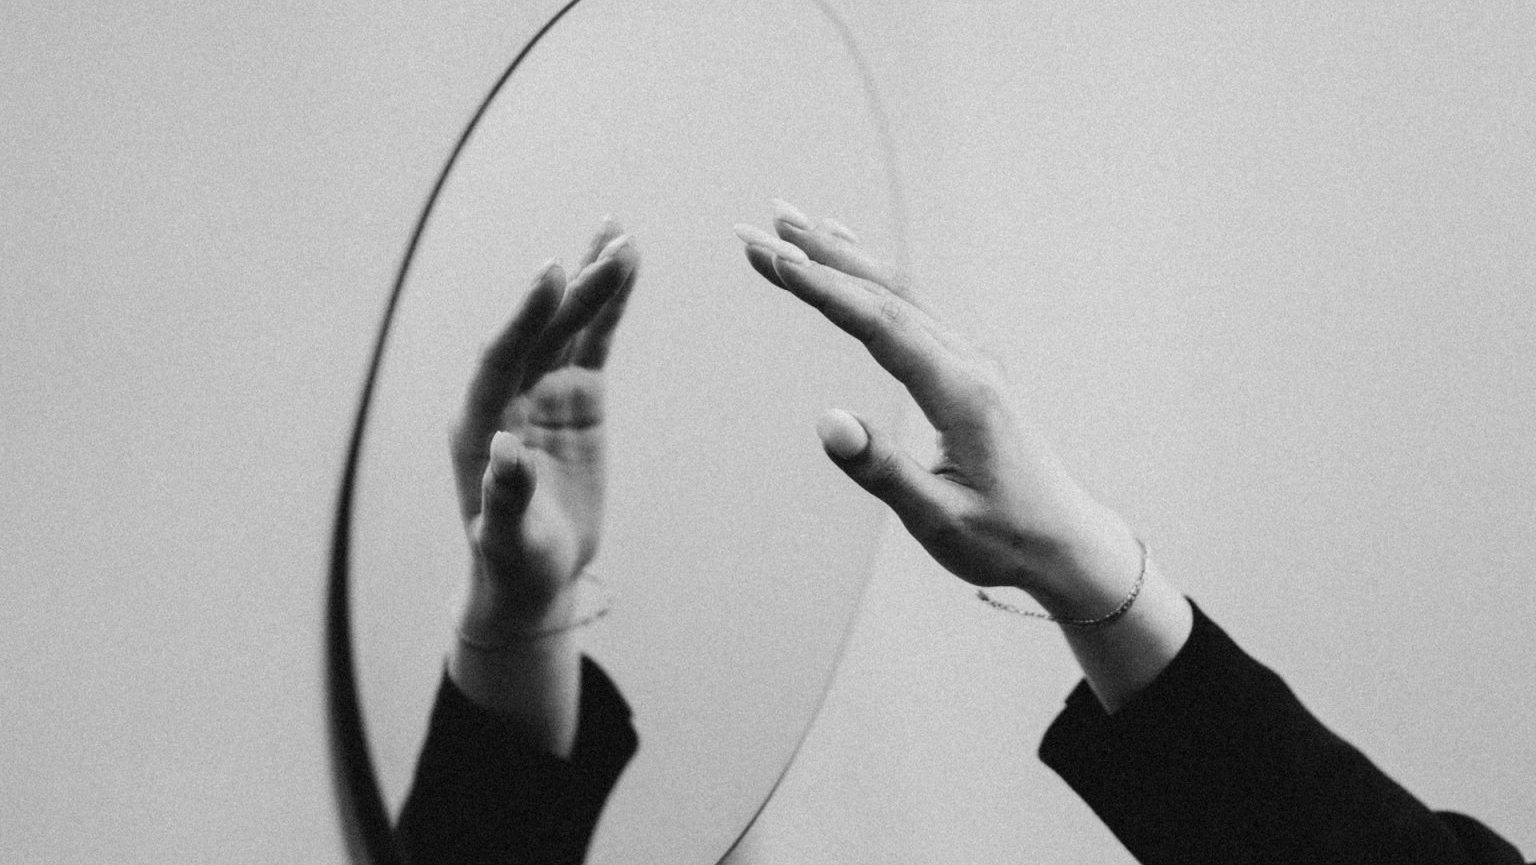 A black and white photo of a hand reaching into a mirror.